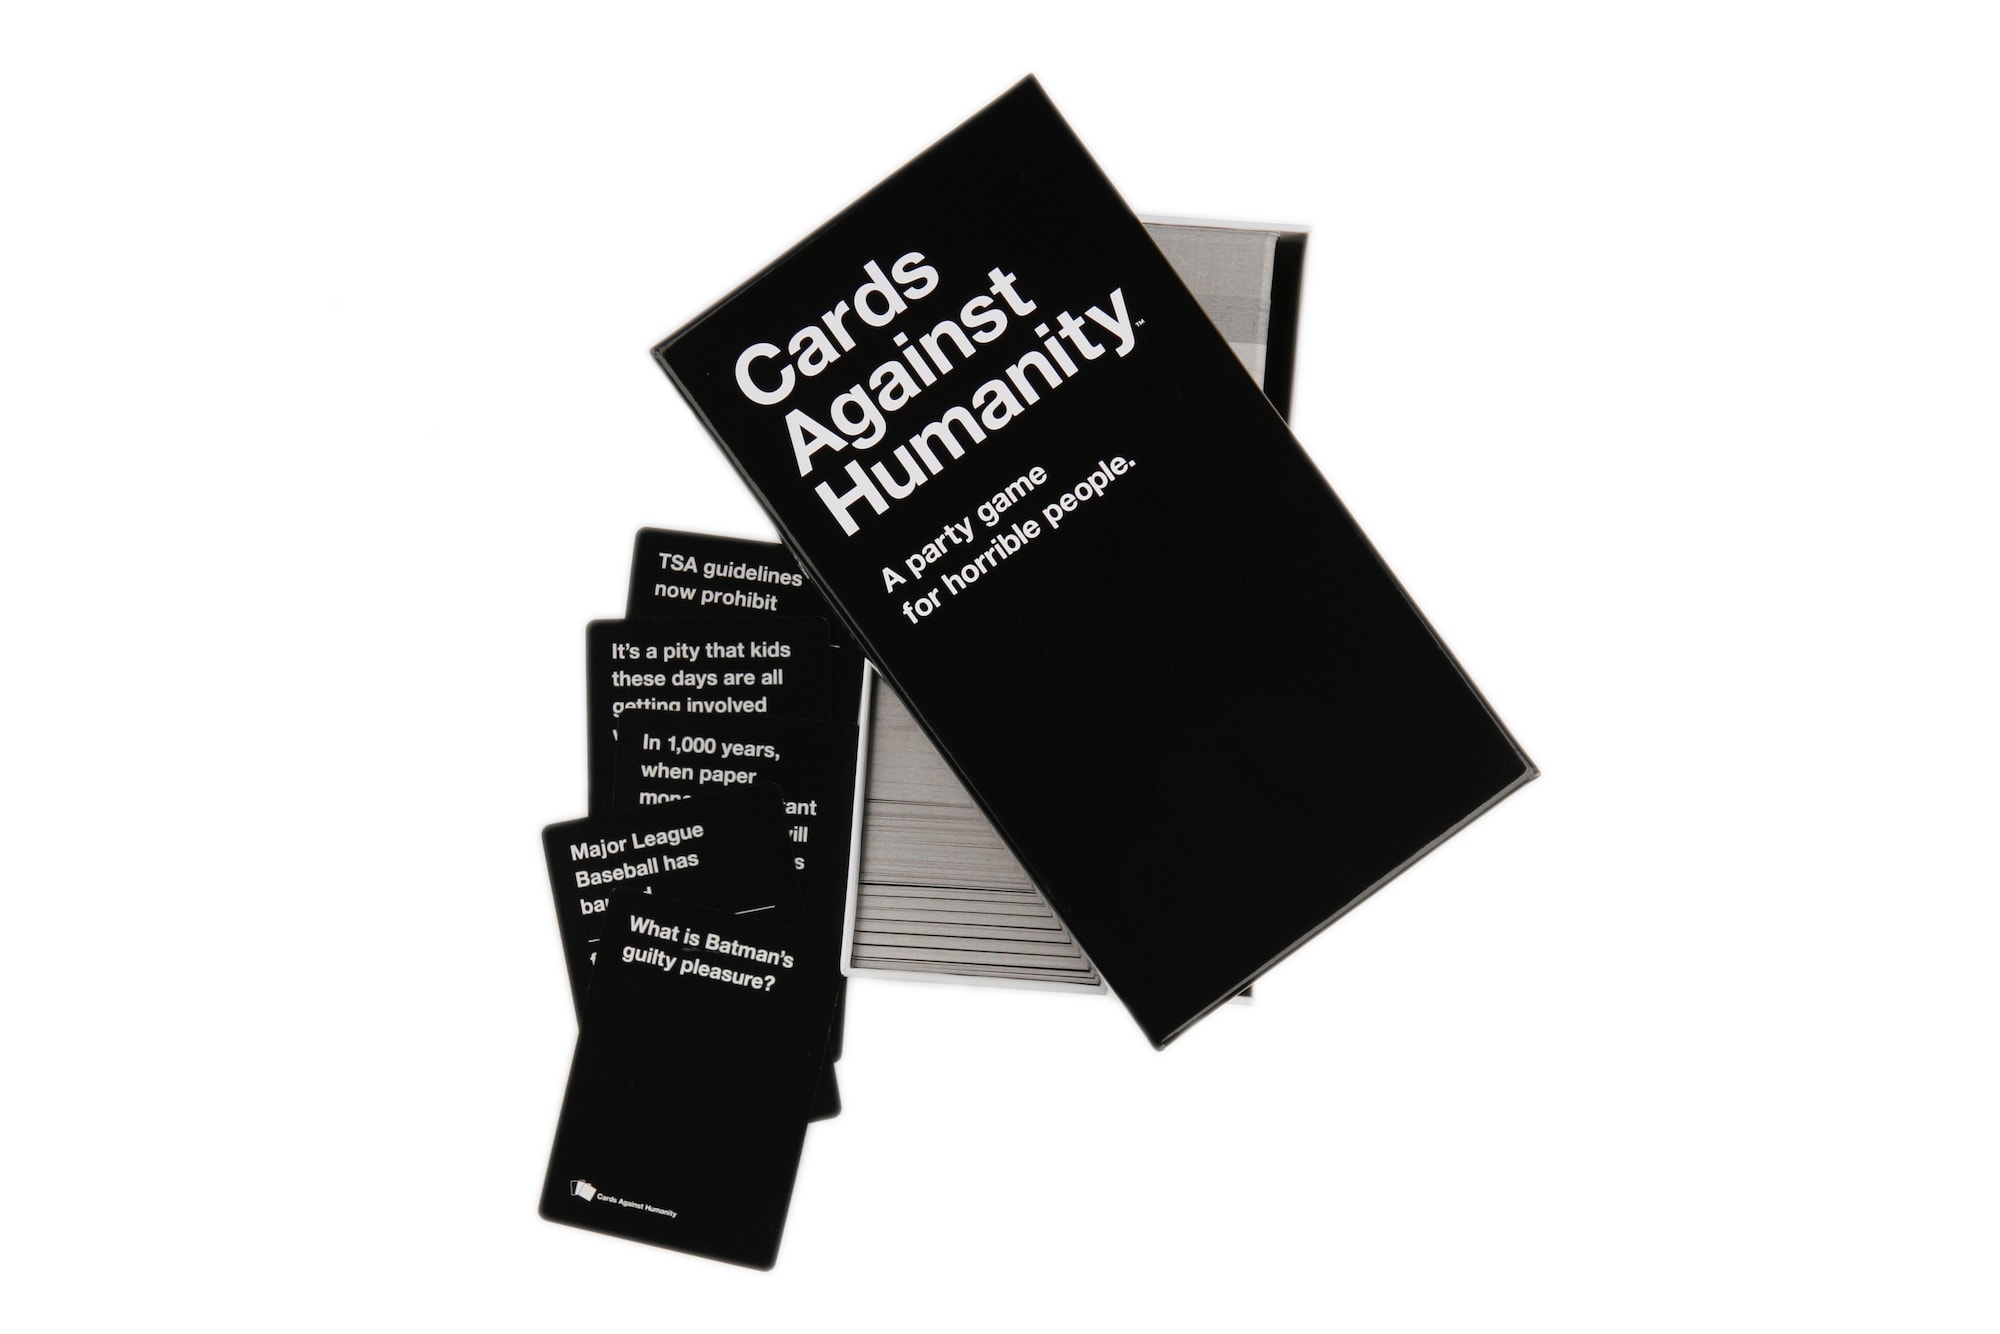 Cards Against Humanity • Main Game